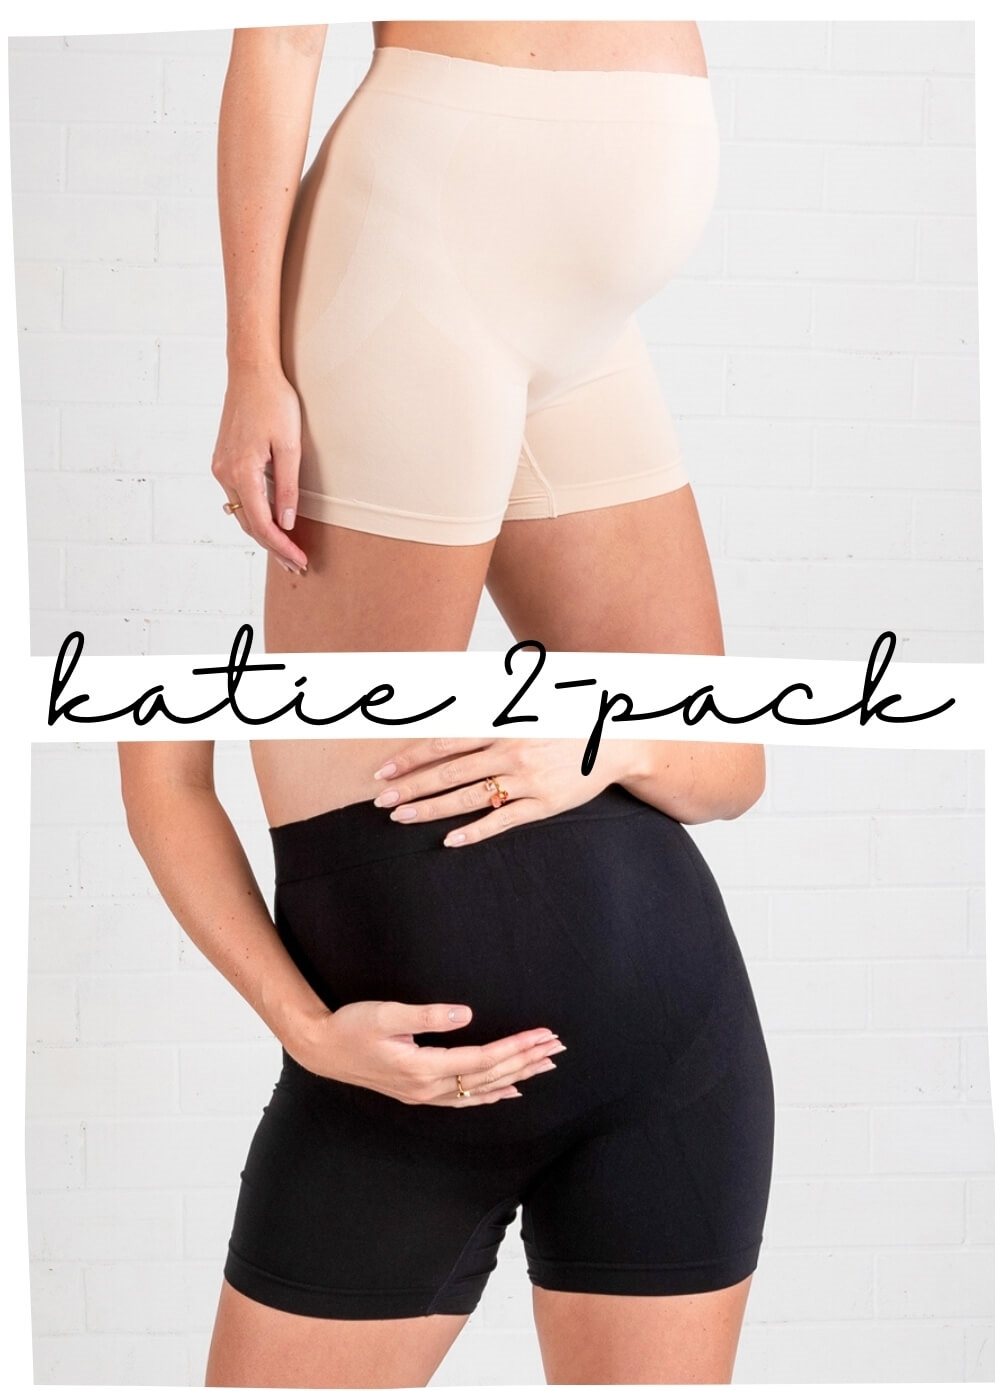 Queen Bee - 2-Pack Katie Seamless Maternity Shorts Bundle